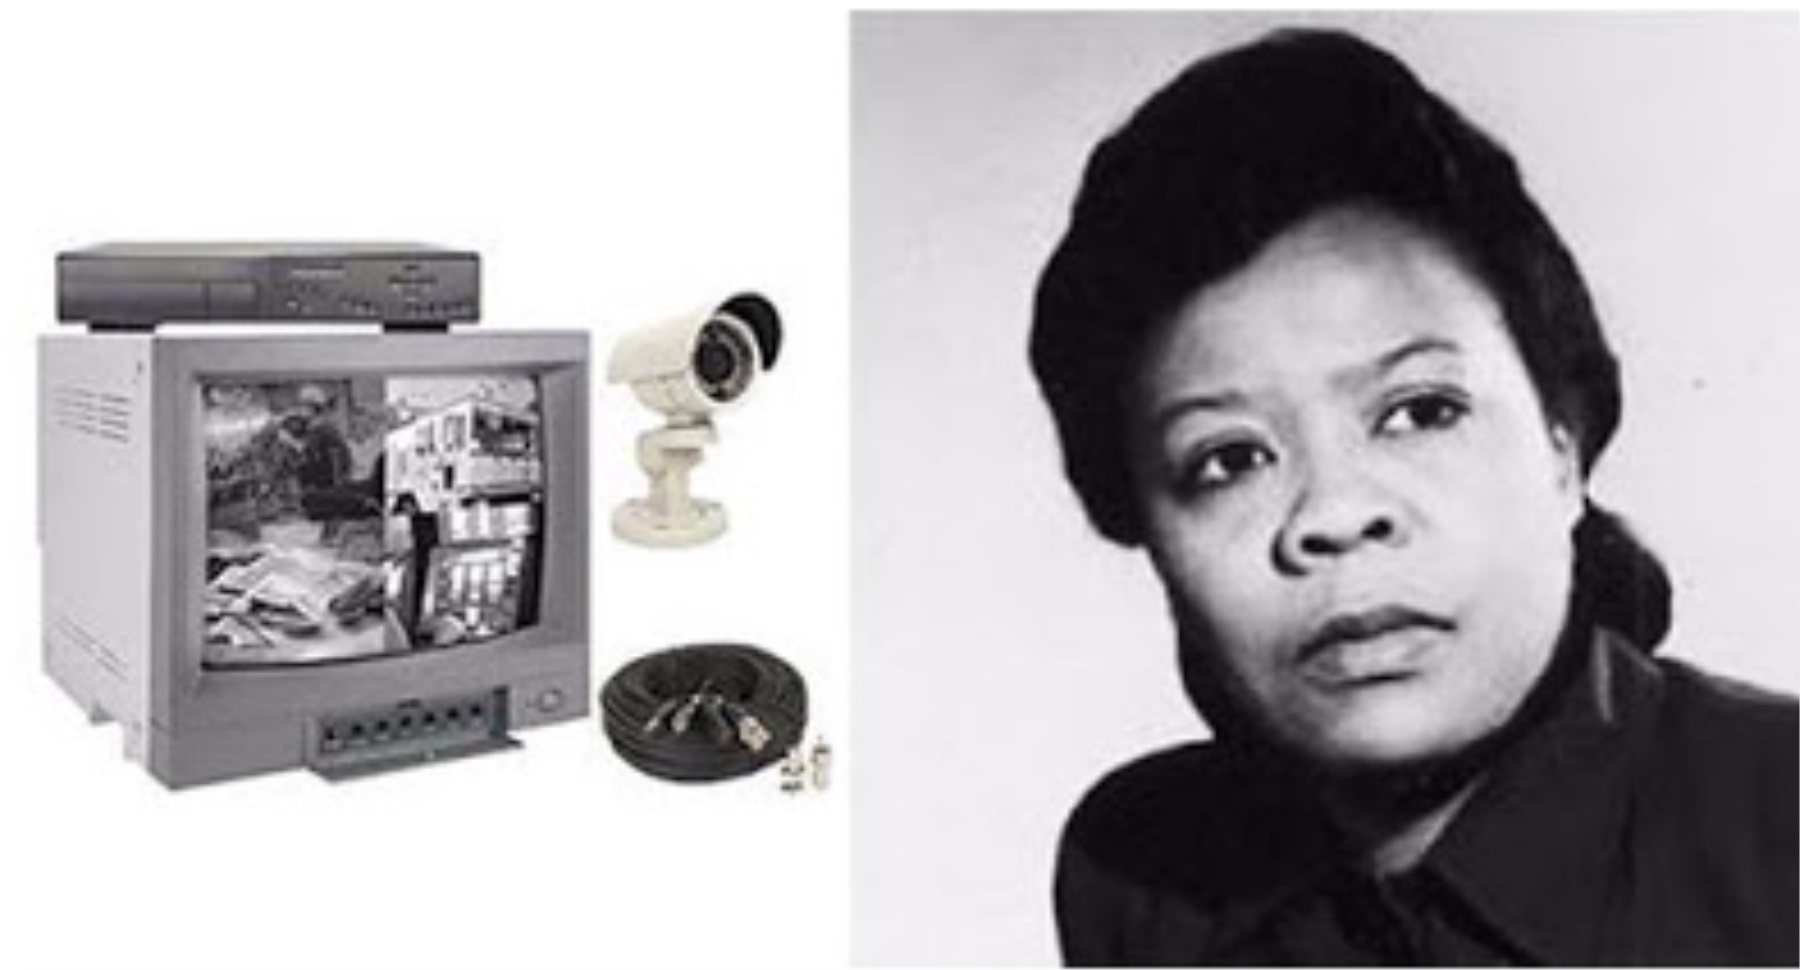 Black woman developed first home security system with TV surveillance in 1966